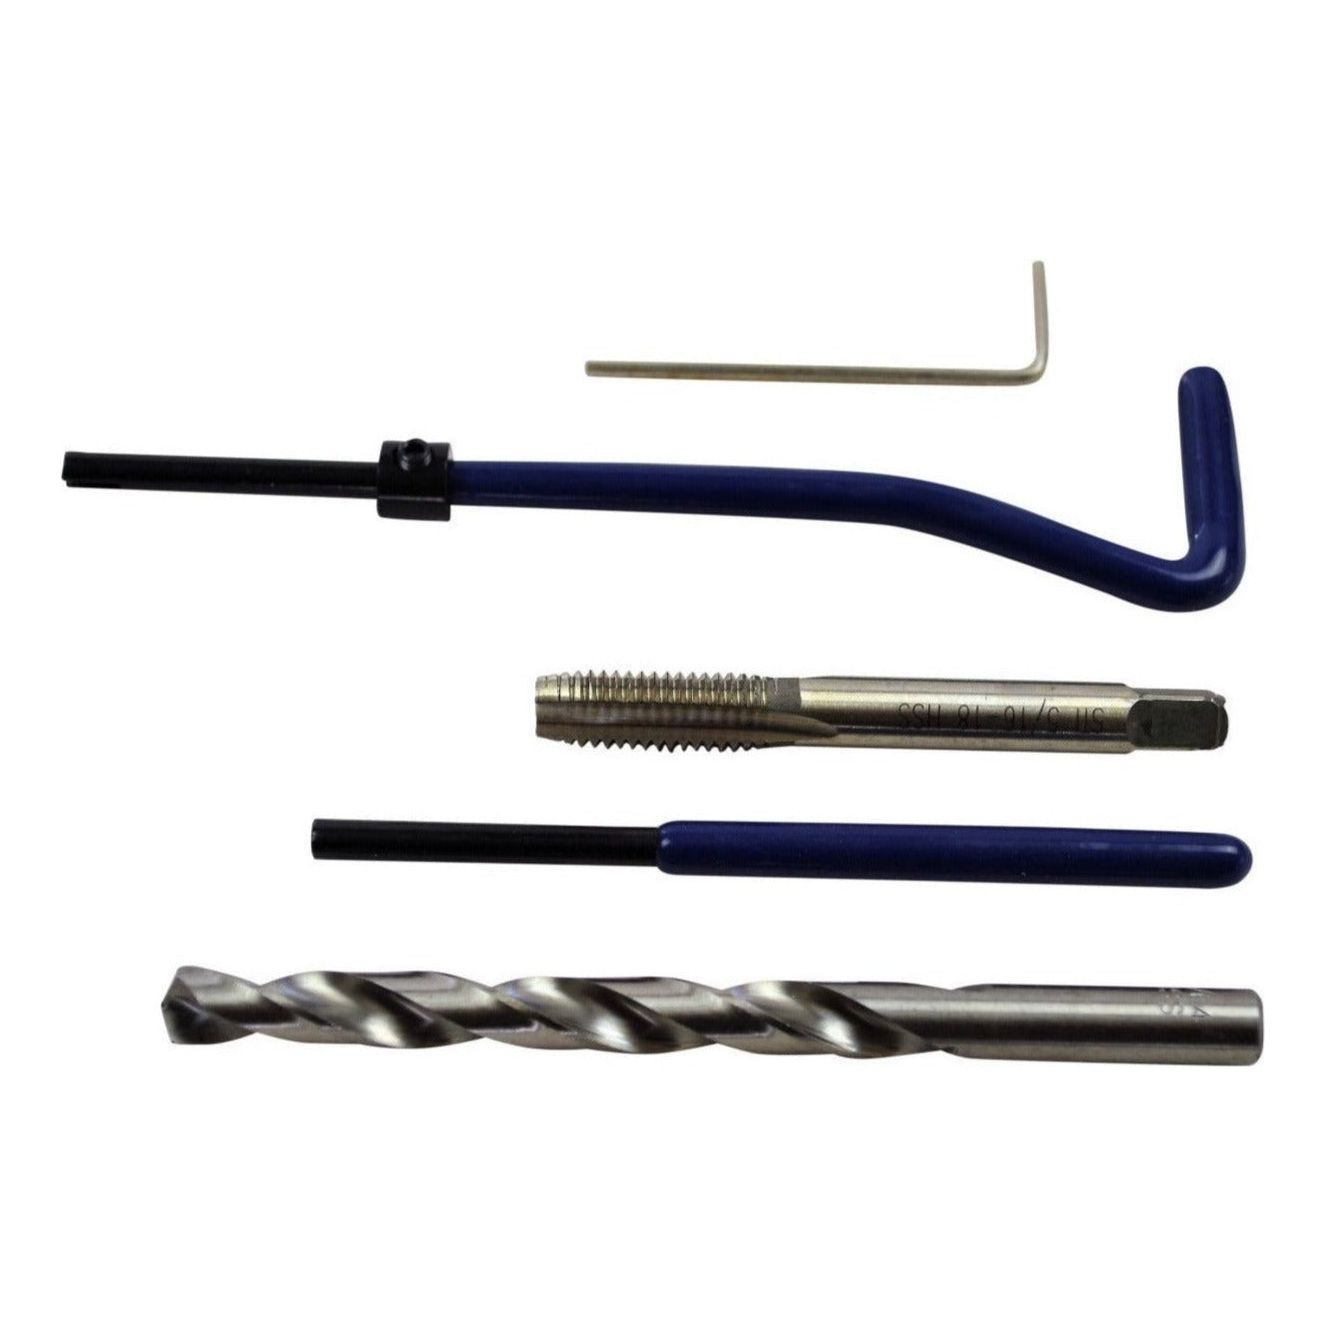 Helicoil Kit 5/16 - 18 Thread Repair Set Includes 25 Helicoil Type Inserts